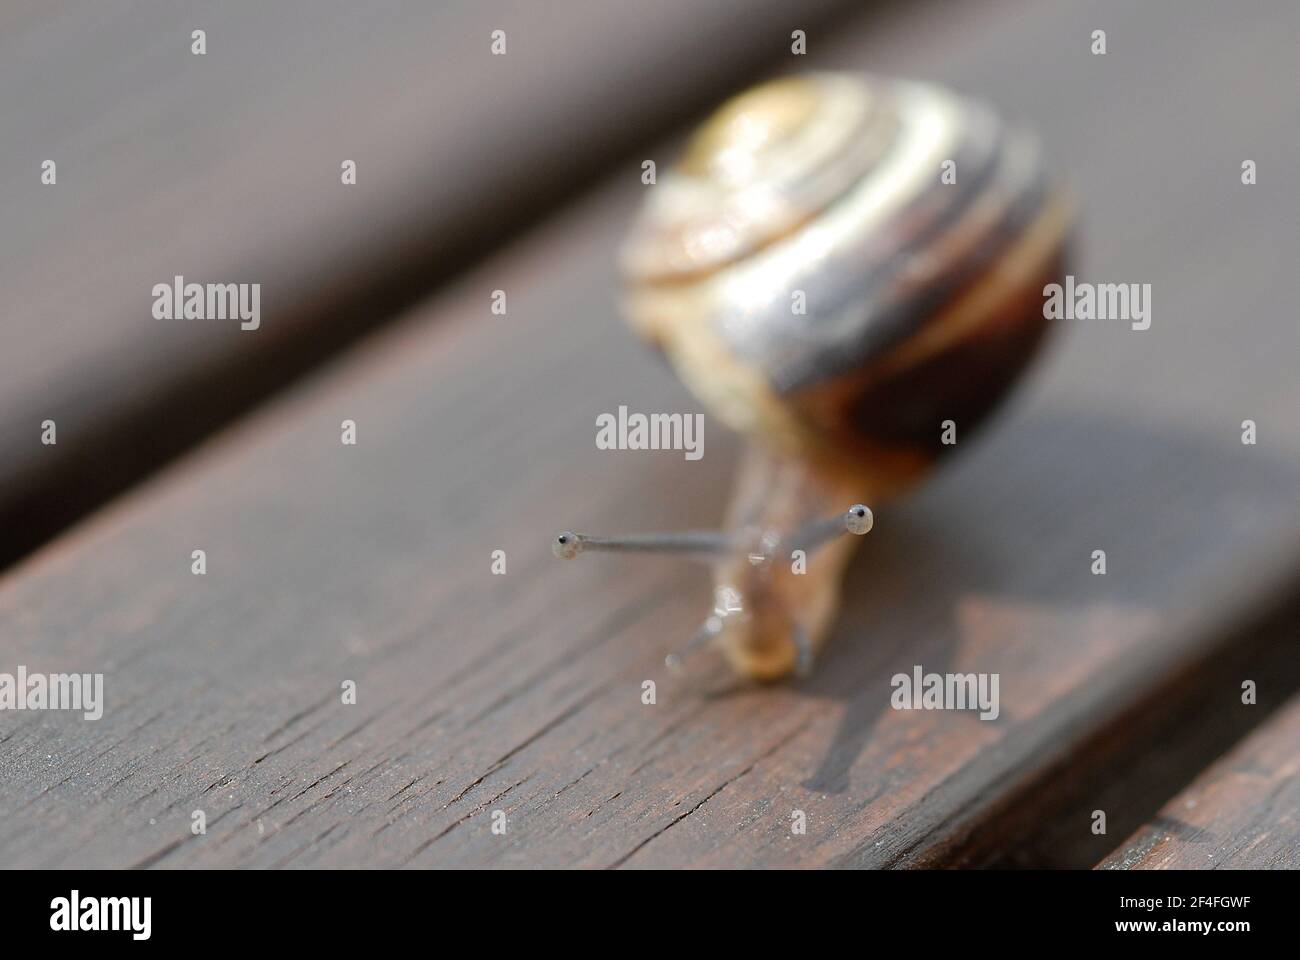 View from the eyes of a snail on brown wood Stock Photo